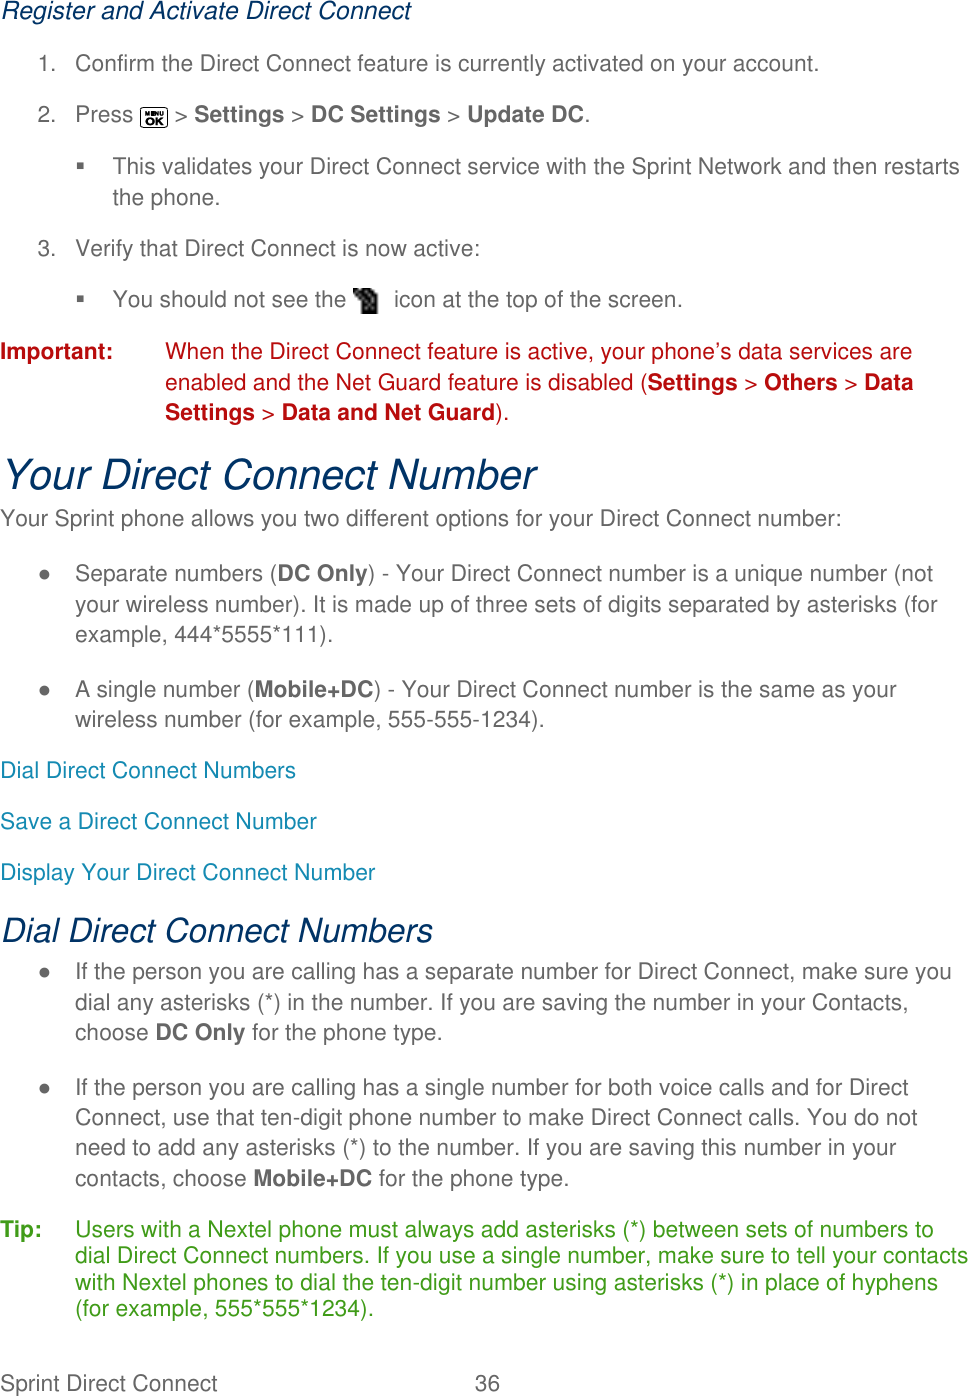  Sprint Direct Connect  36   Register and Activate Direct Connect 1.  Confirm the Direct Connect feature is currently activated on your account. 2.  Press   &gt; Settings &gt; DC Settings &gt; Update DC.   This validates your Direct Connect service with the Sprint Network and then restarts the phone. 3.  Verify that Direct Connect is now active:   You should not see the   icon at the top of the screen.  Important:  When the Direct Connect feature is active, your phone’s data services are enabled and the Net Guard feature is disabled (Settings &gt; Others &gt; Data Settings &gt; Data and Net Guard). Your Direct Connect Number Your Sprint phone allows you two different options for your Direct Connect number: ●  Separate numbers (DC Only) - Your Direct Connect number is a unique number (not your wireless number). It is made up of three sets of digits separated by asterisks (for example, 444*5555*111). ●  A single number (Mobile+DC) - Your Direct Connect number is the same as your wireless number (for example, 555-555-1234). Dial Direct Connect Numbers Save a Direct Connect Number Display Your Direct Connect Number Dial Direct Connect Numbers ●  If the person you are calling has a separate number for Direct Connect, make sure you dial any asterisks (*) in the number. If you are saving the number in your Contacts, choose DC Only for the phone type. ●  If the person you are calling has a single number for both voice calls and for Direct Connect, use that ten-digit phone number to make Direct Connect calls. You do not need to add any asterisks (*) to the number. If you are saving this number in your contacts, choose Mobile+DC for the phone type. Tip:   Users with a Nextel phone must always add asterisks (*) between sets of numbers to dial Direct Connect numbers. If you use a single number, make sure to tell your contacts with Nextel phones to dial the ten-digit number using asterisks (*) in place of hyphens (for example, 555*555*1234). 